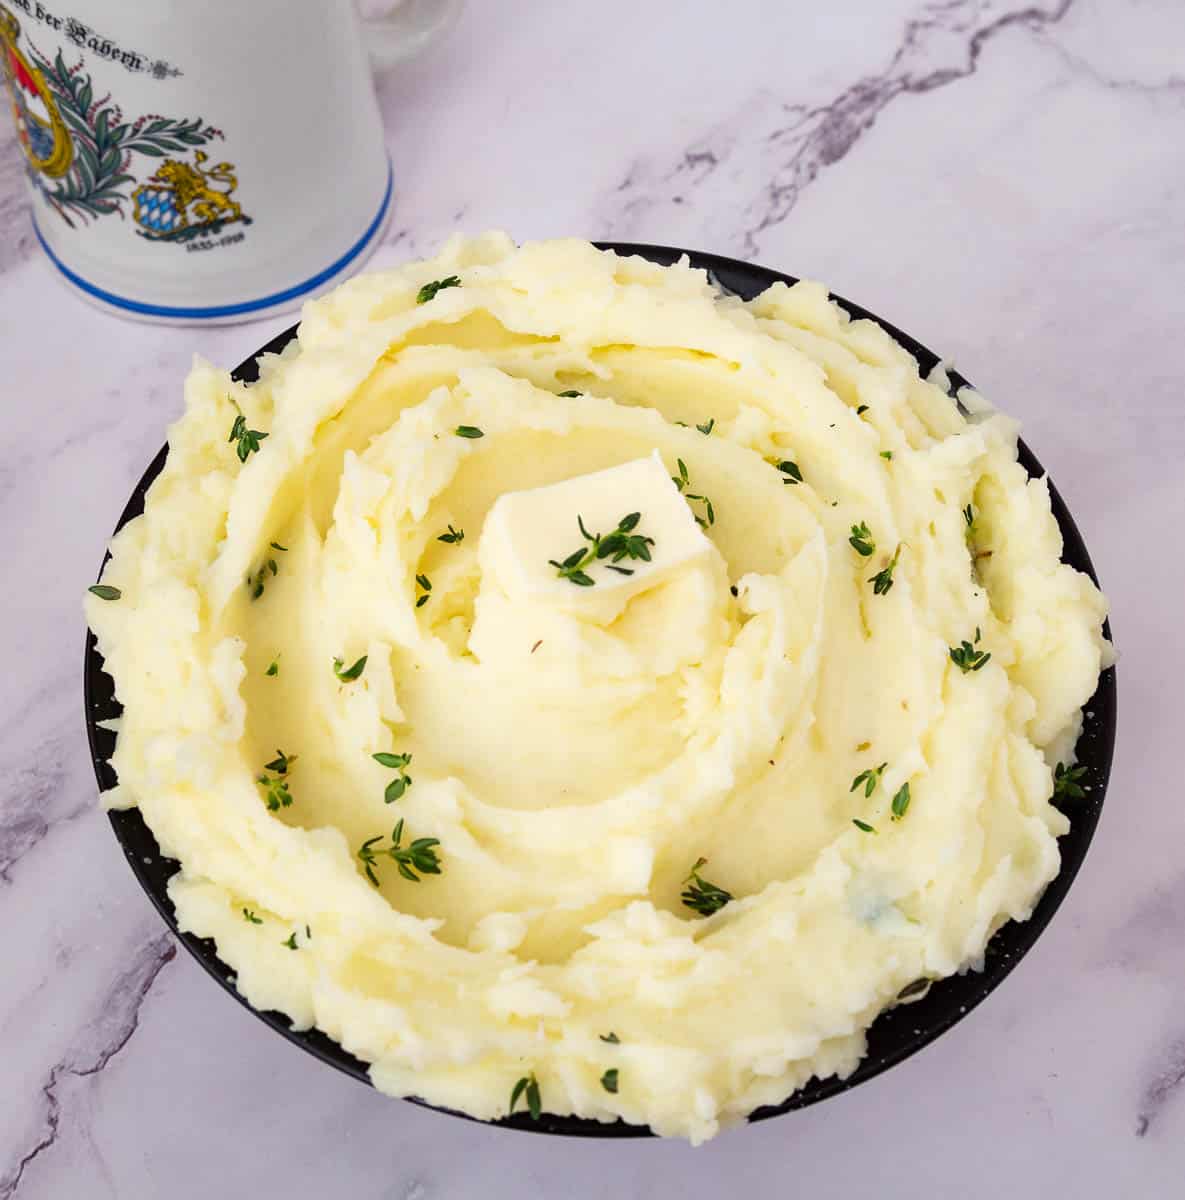 A bowl with potatoes - mashed.